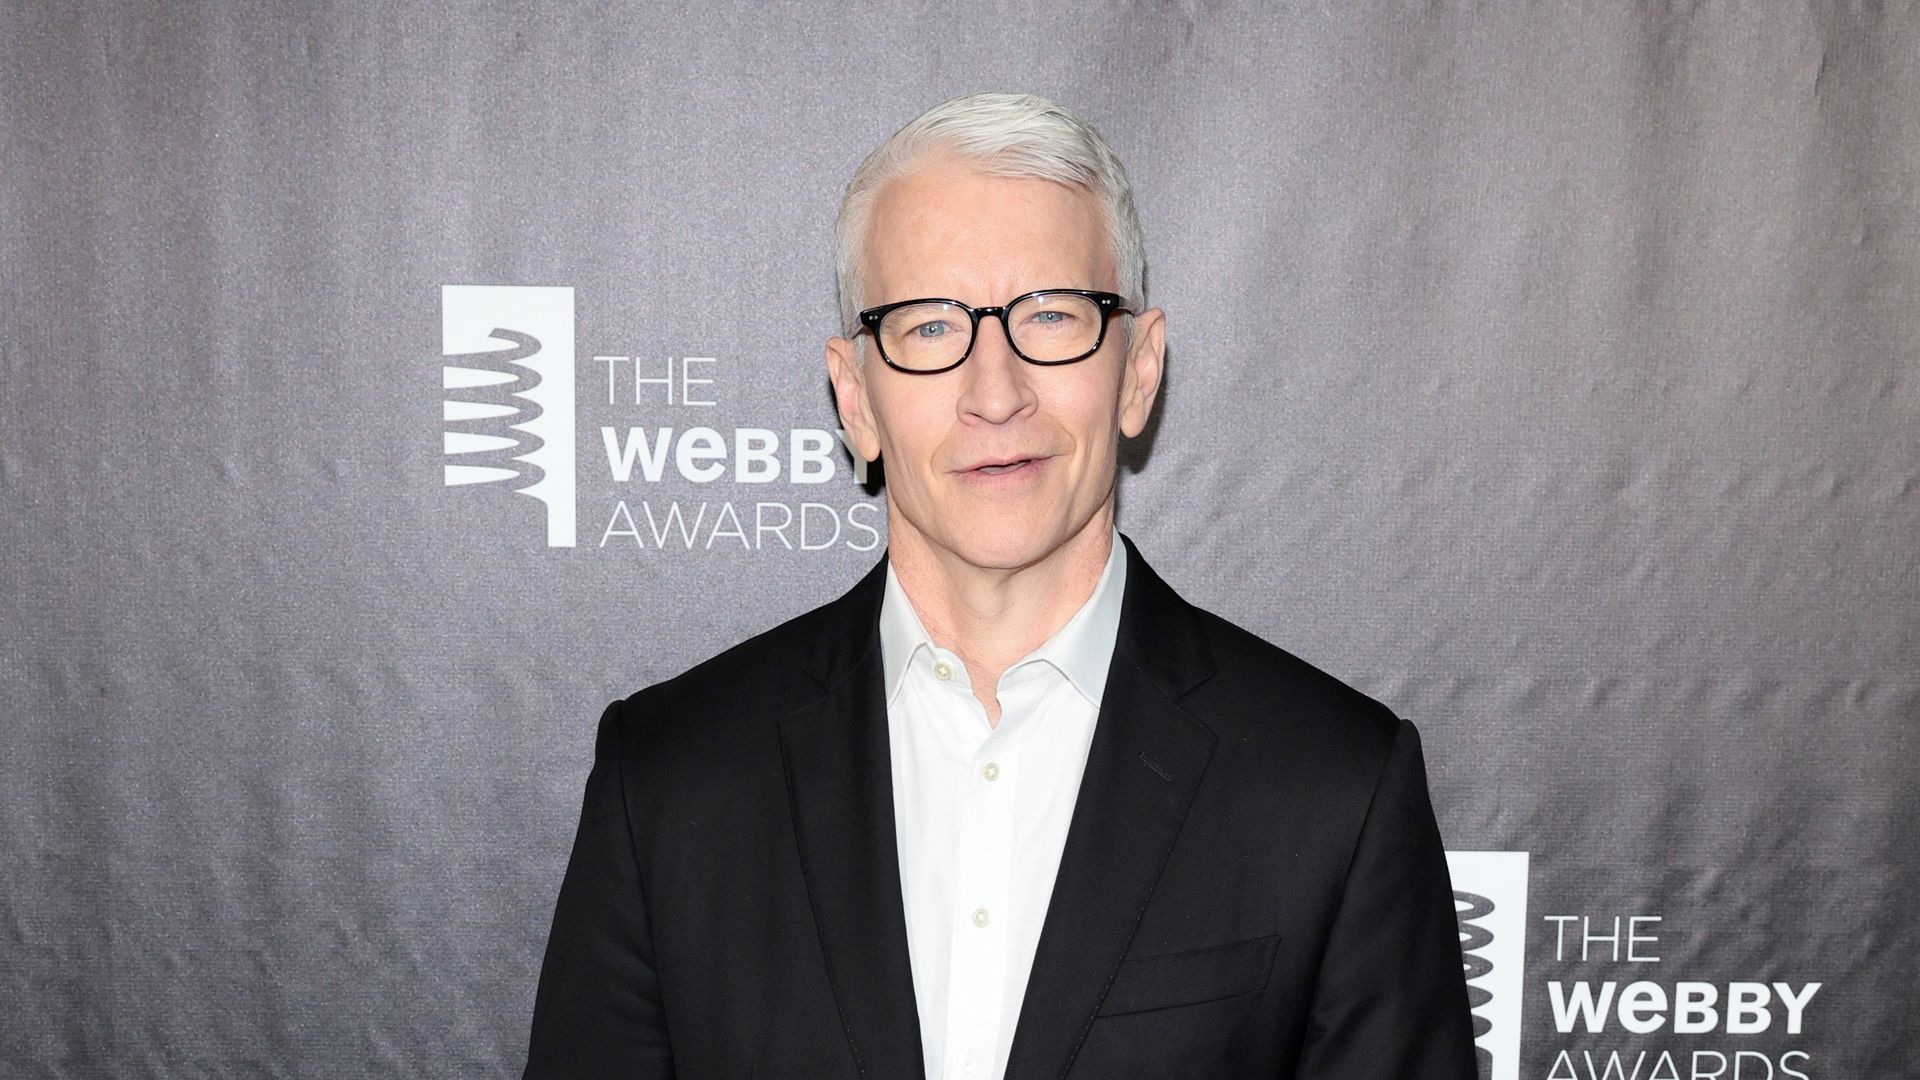 Anderson Cooper's family was once worth $200 billion, but what is his net worth today?